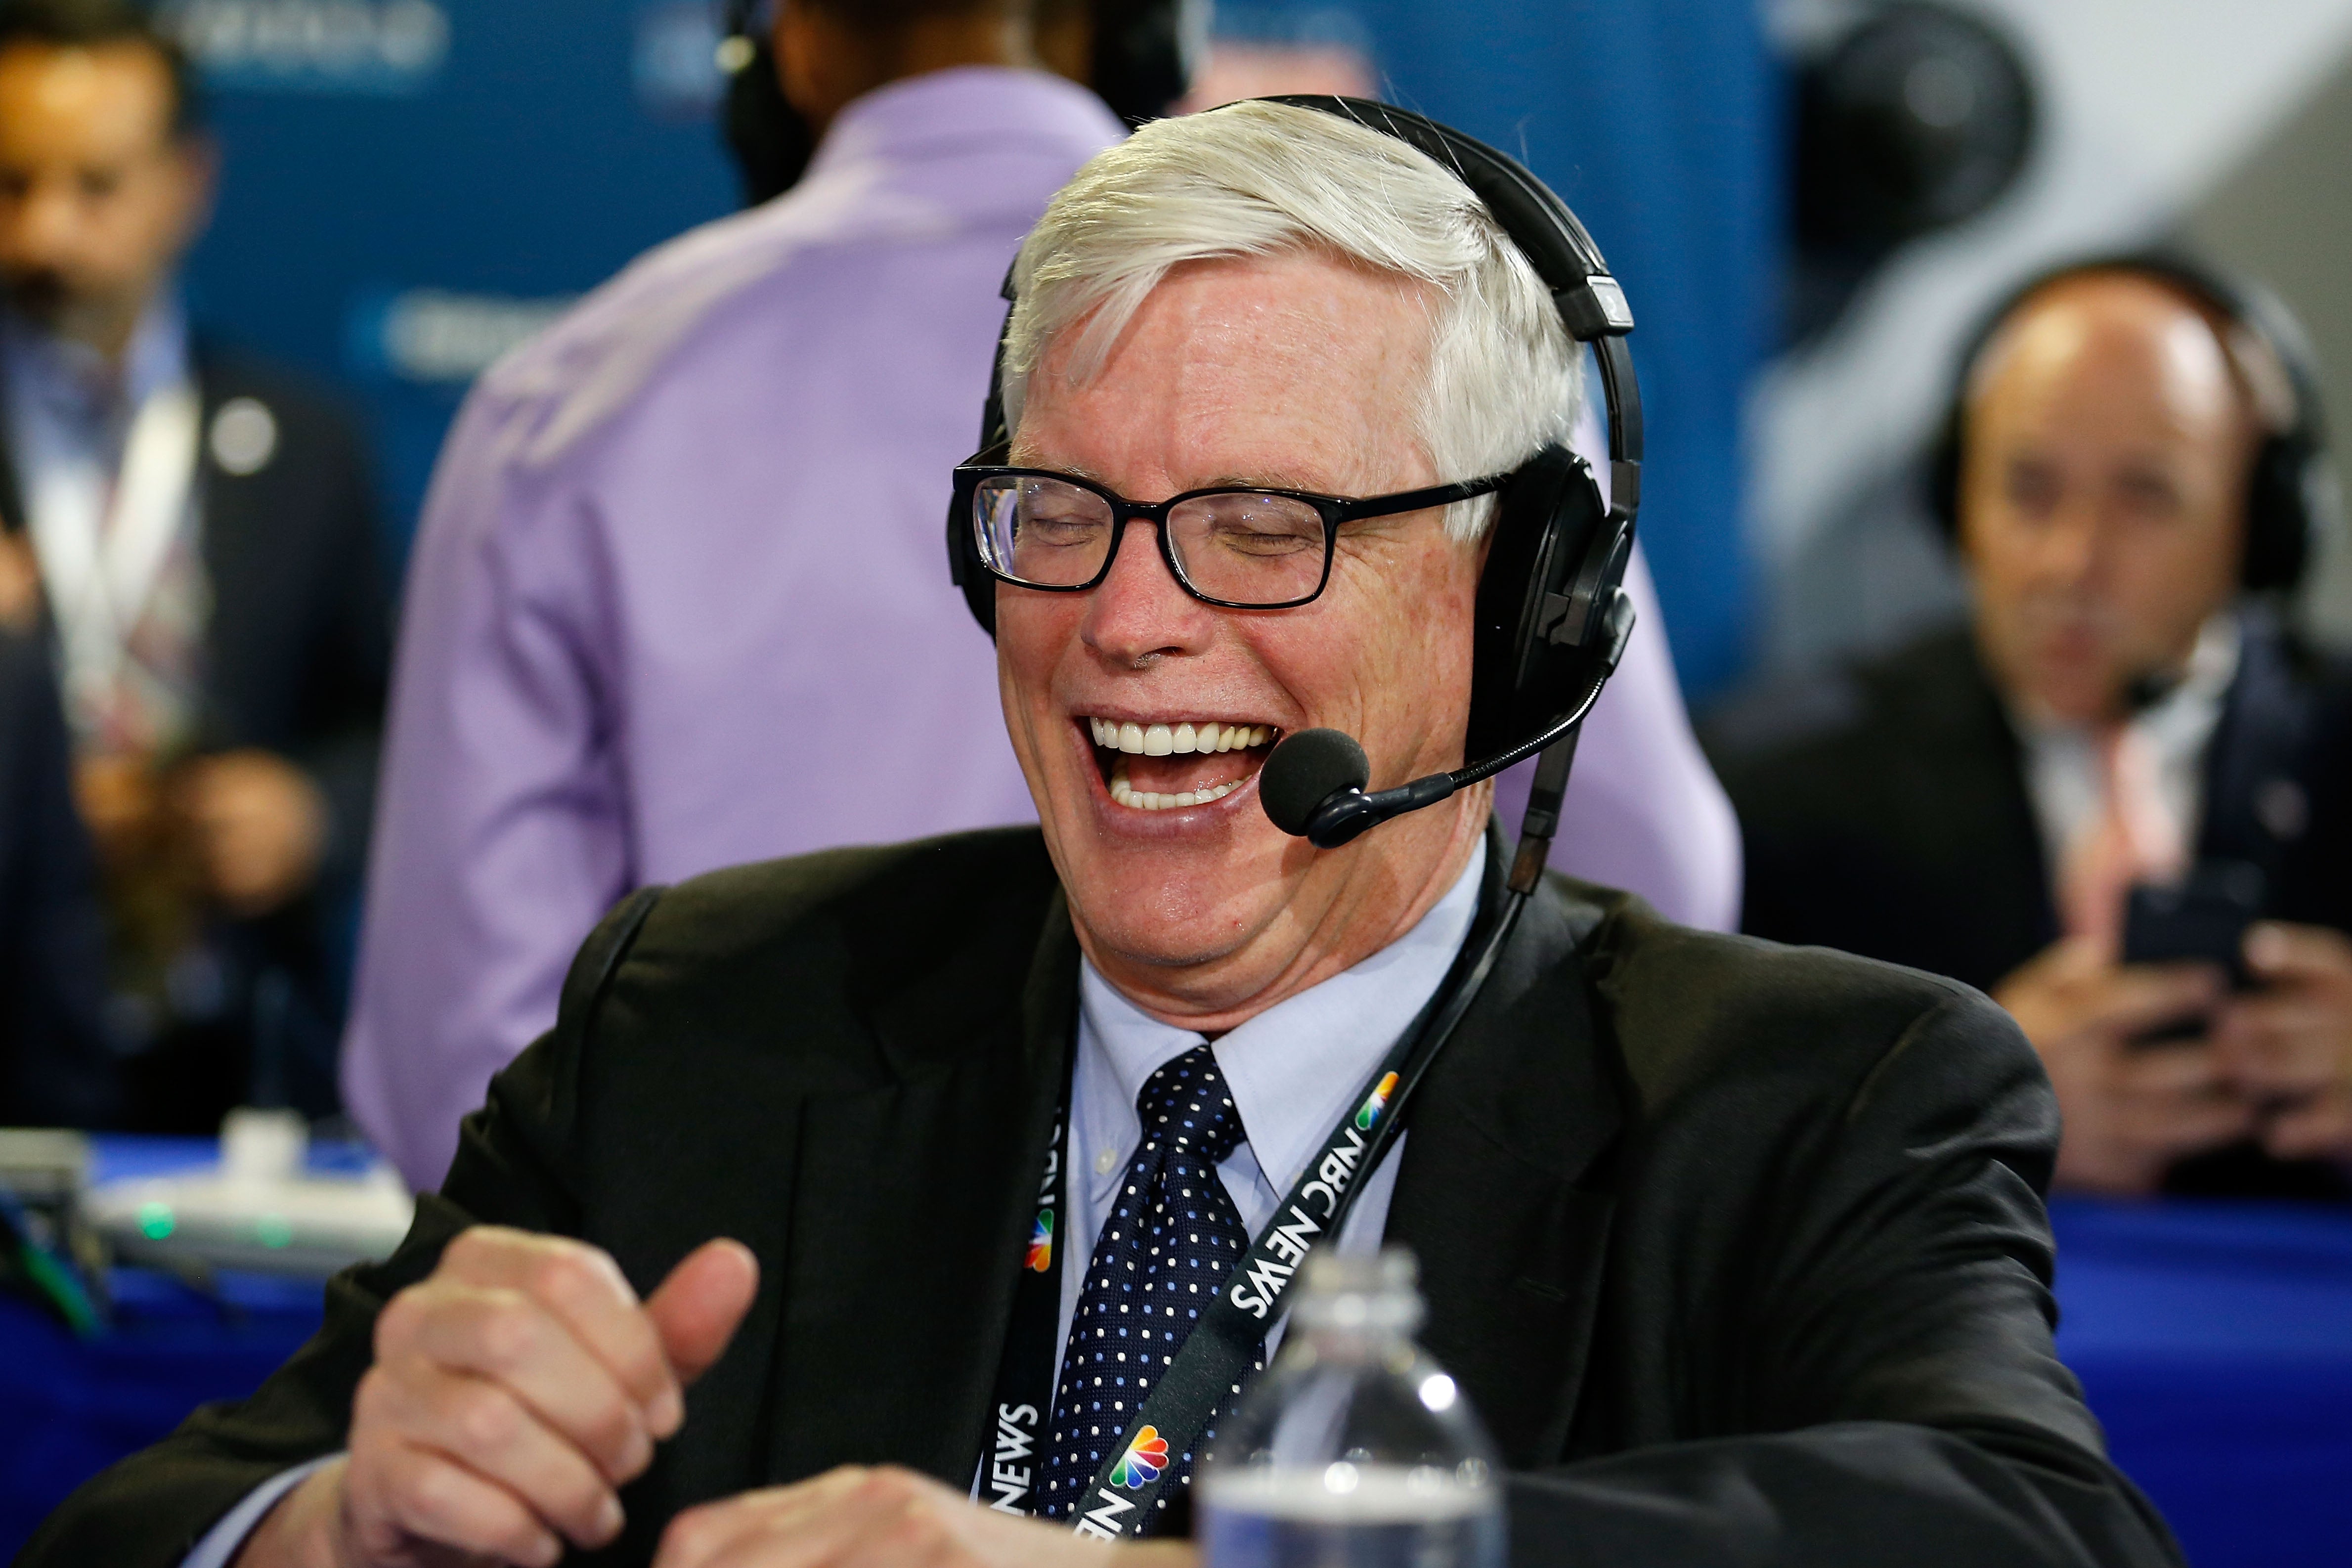 Hugh Hewitt reacts to a comment while siting down to talk about the 2016 presidential race with Jonathan Alter on his show, "Alter Family Politics" at Quicken Loans Arena on July 20, 2016 in Cleveland, Ohio